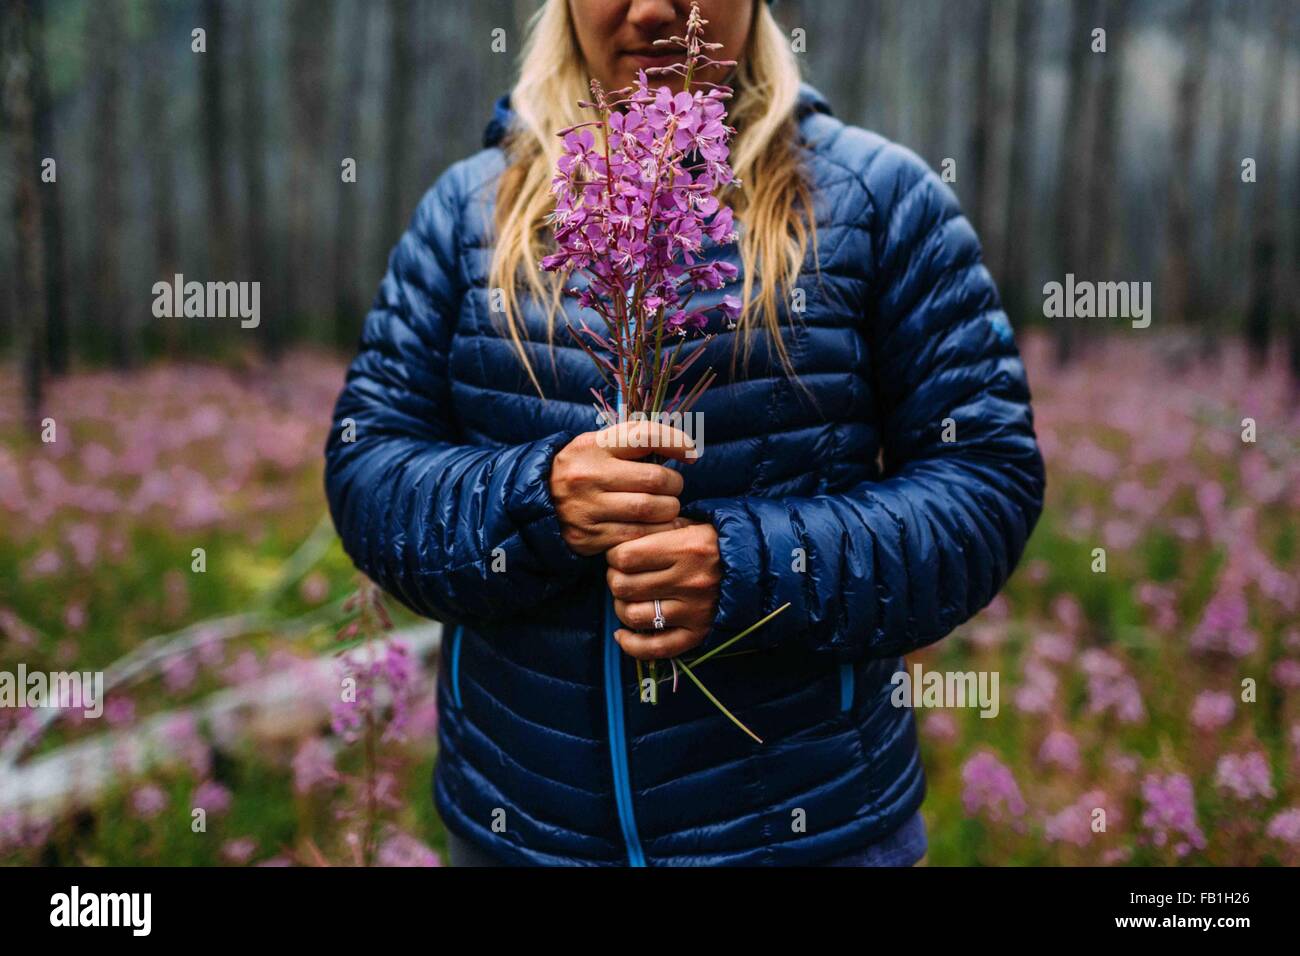 Cropped view of mid adult woman wearing padded coat holding wildflowers, Moraine lake, Banff National Park, Alberta Canada Stock Photo